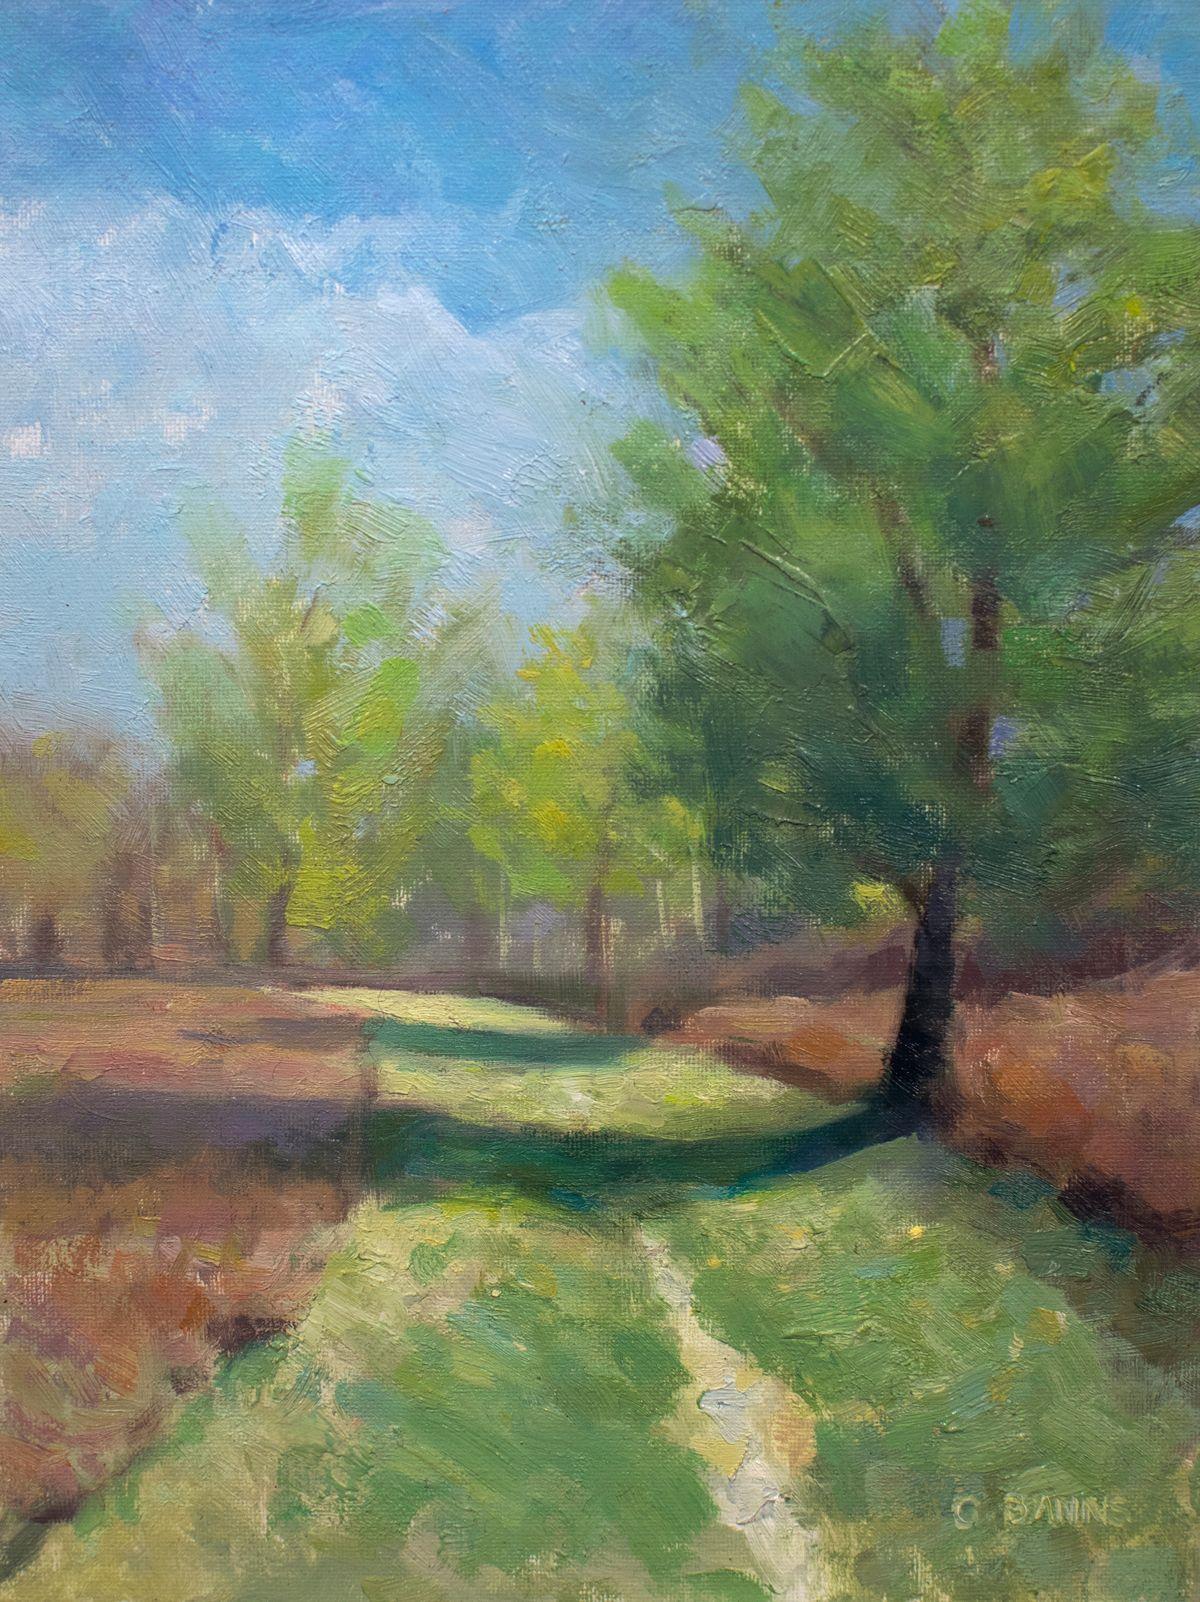 This is a pathway into a nature reserve (home to salamanders, rare frogs and butterflies) in a remote part of Western France. It is painted on Italian canvasboard (canvas attached to a wooden board) in an impressionist manner, and has been left for